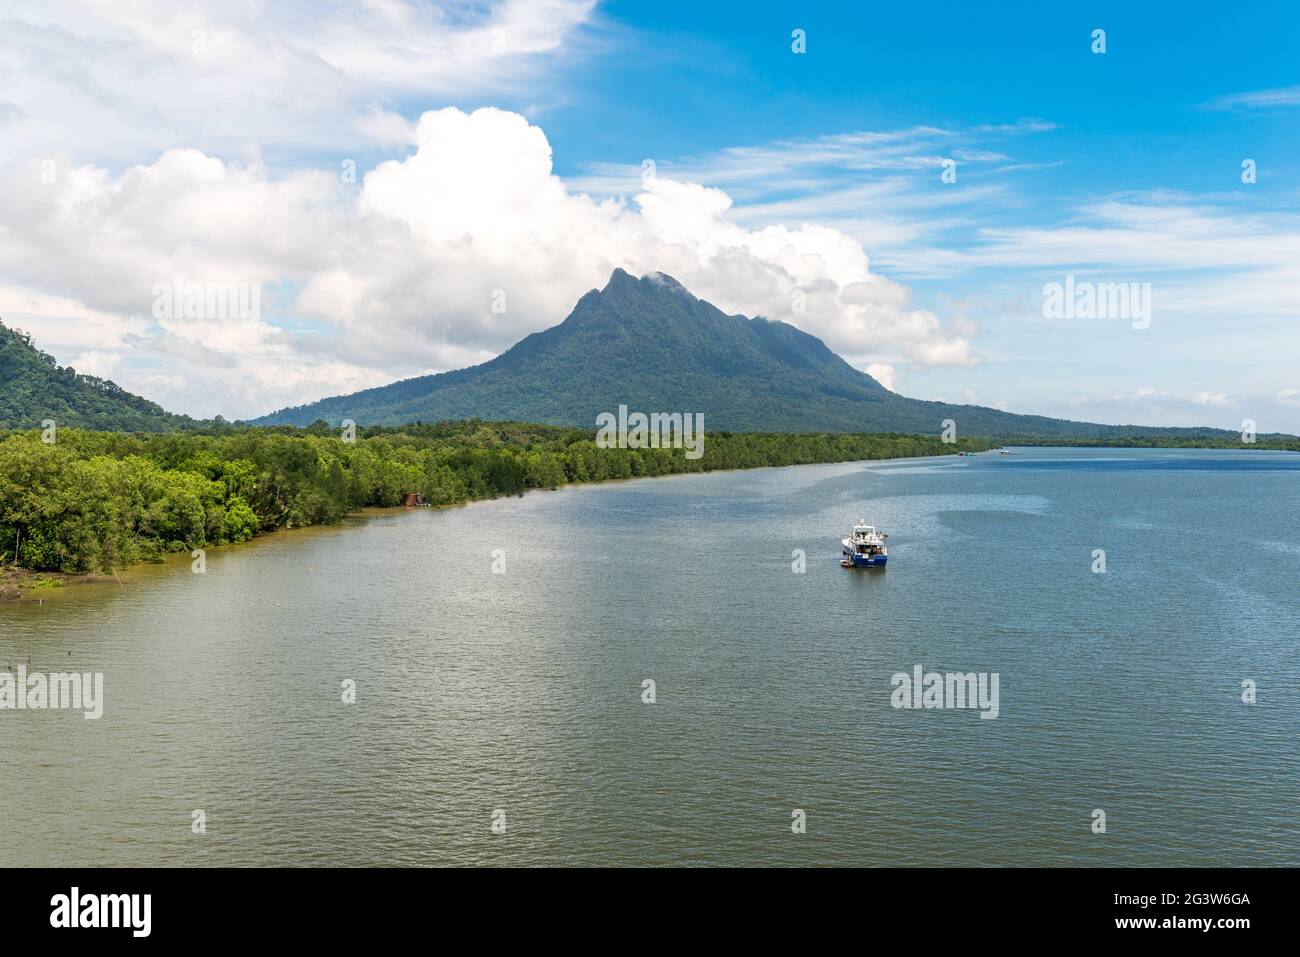 Mount Santubong und Santubong river in the north of the the Malaysian state of Sarawak on Borneo Stock Photo